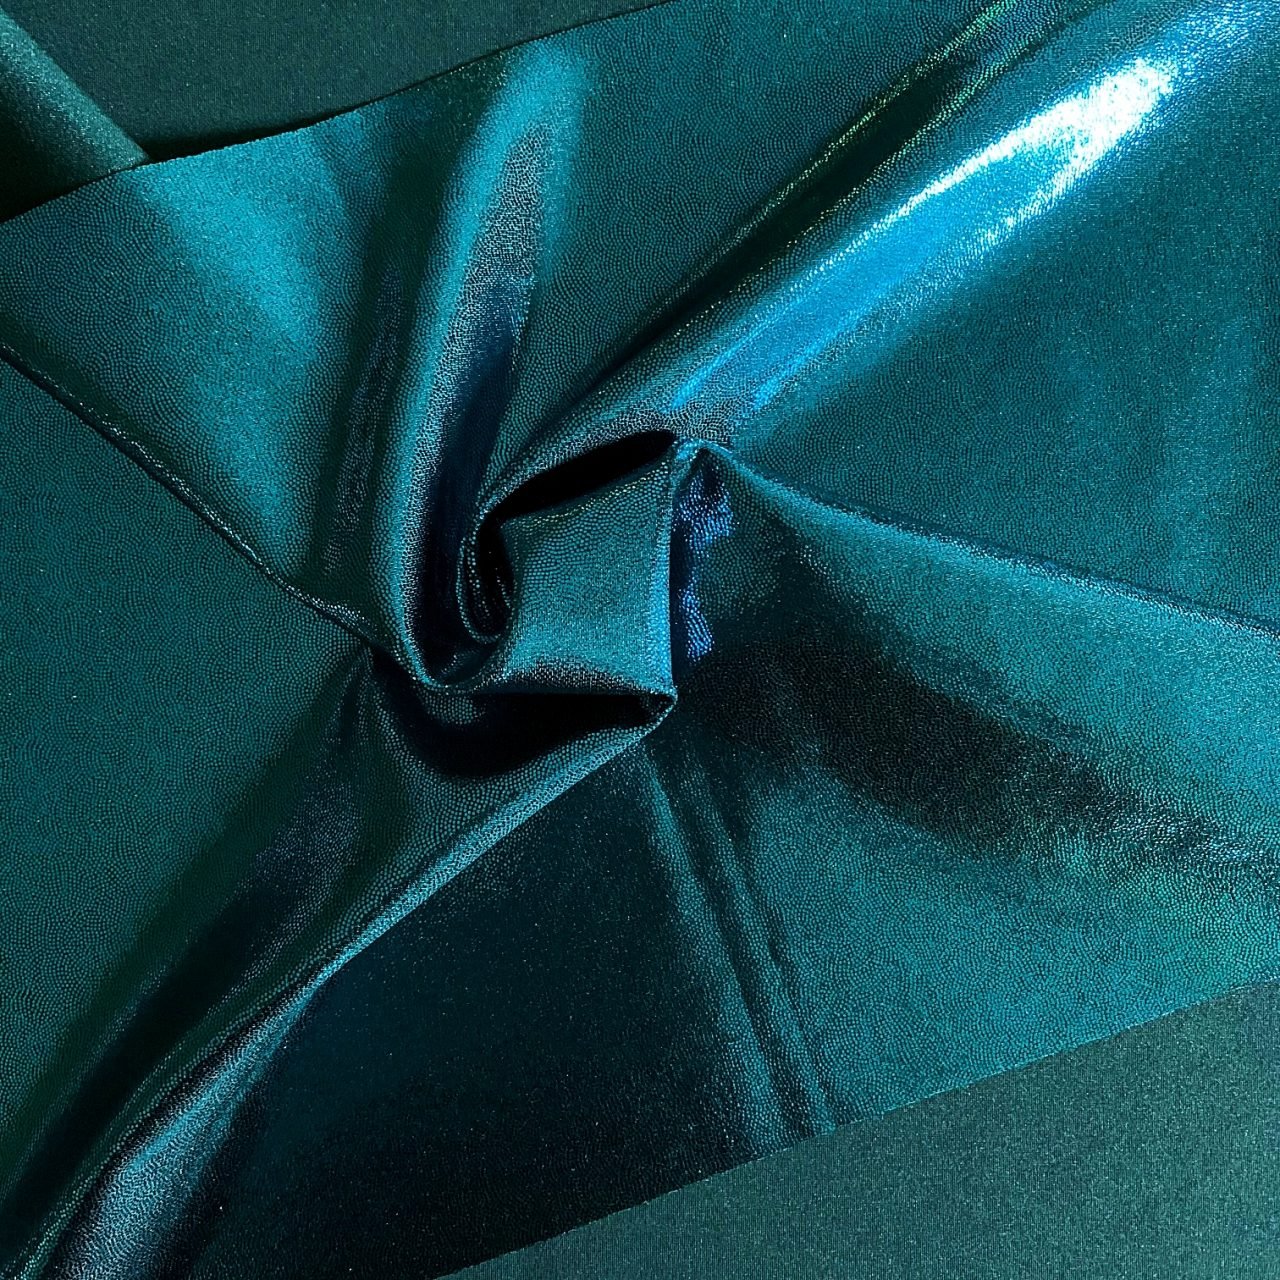 Turquoise Foil Fabric is perfect for dance, cheer, bows, gymnastics, figure skating, costume, cosplay, apparel and more.